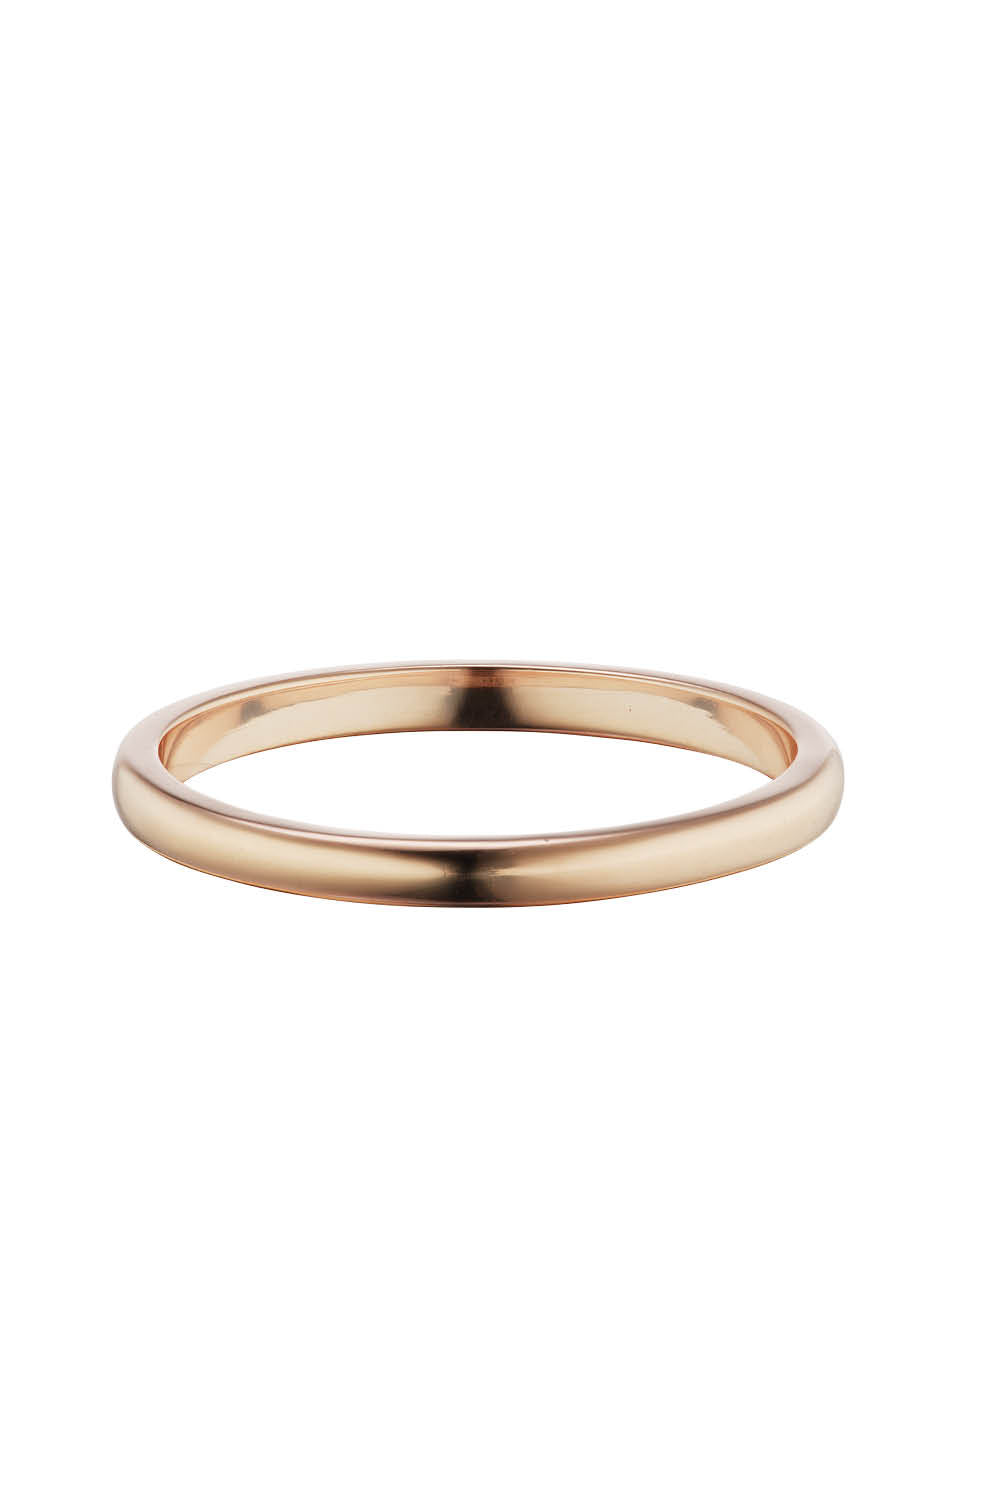 Reclaimed Classic Ring in Rose Gold